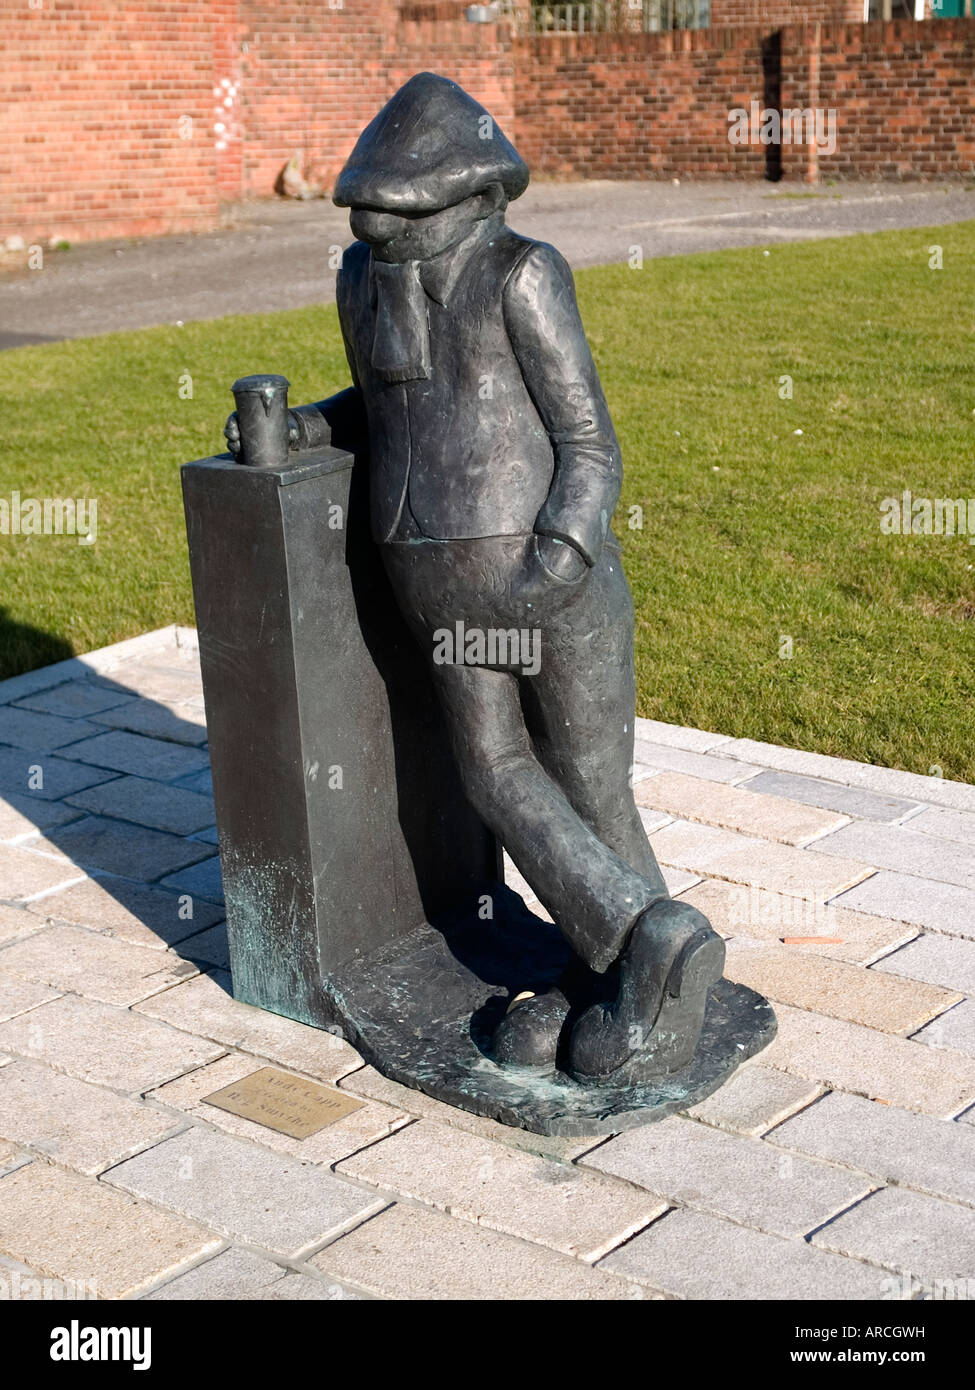 A bronze statue of a well known cartoon character Andy Capp at the Headland Hartlepool Co Durham, home of his creator Reg Smythe Stock Photo